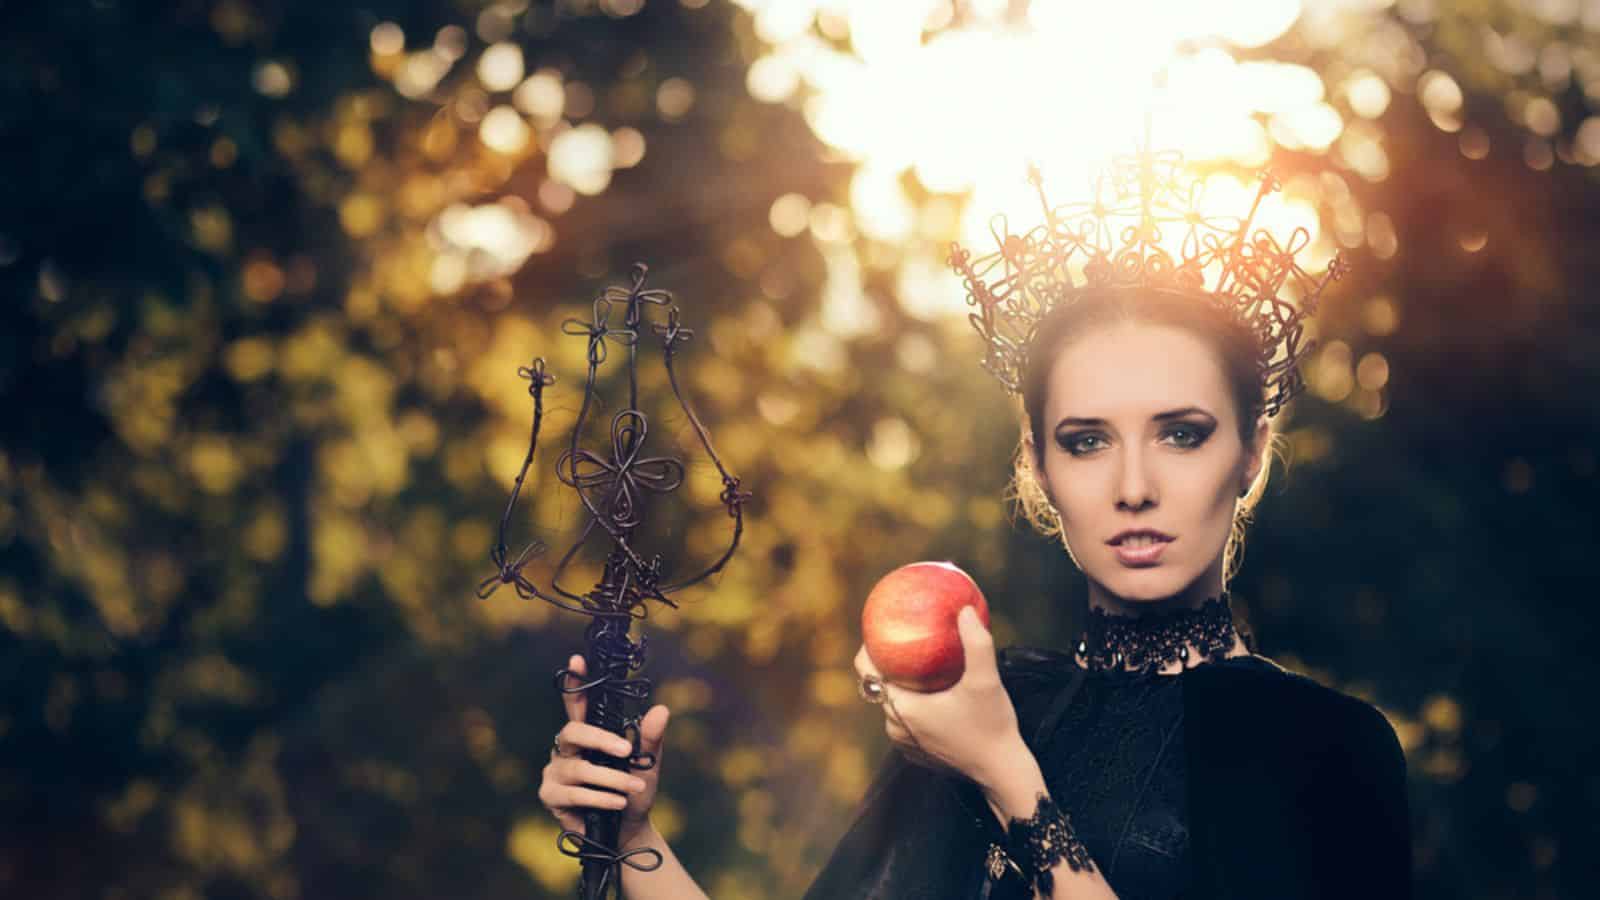 Evil Queen with Poisoned Apple in Fantasy Portrait